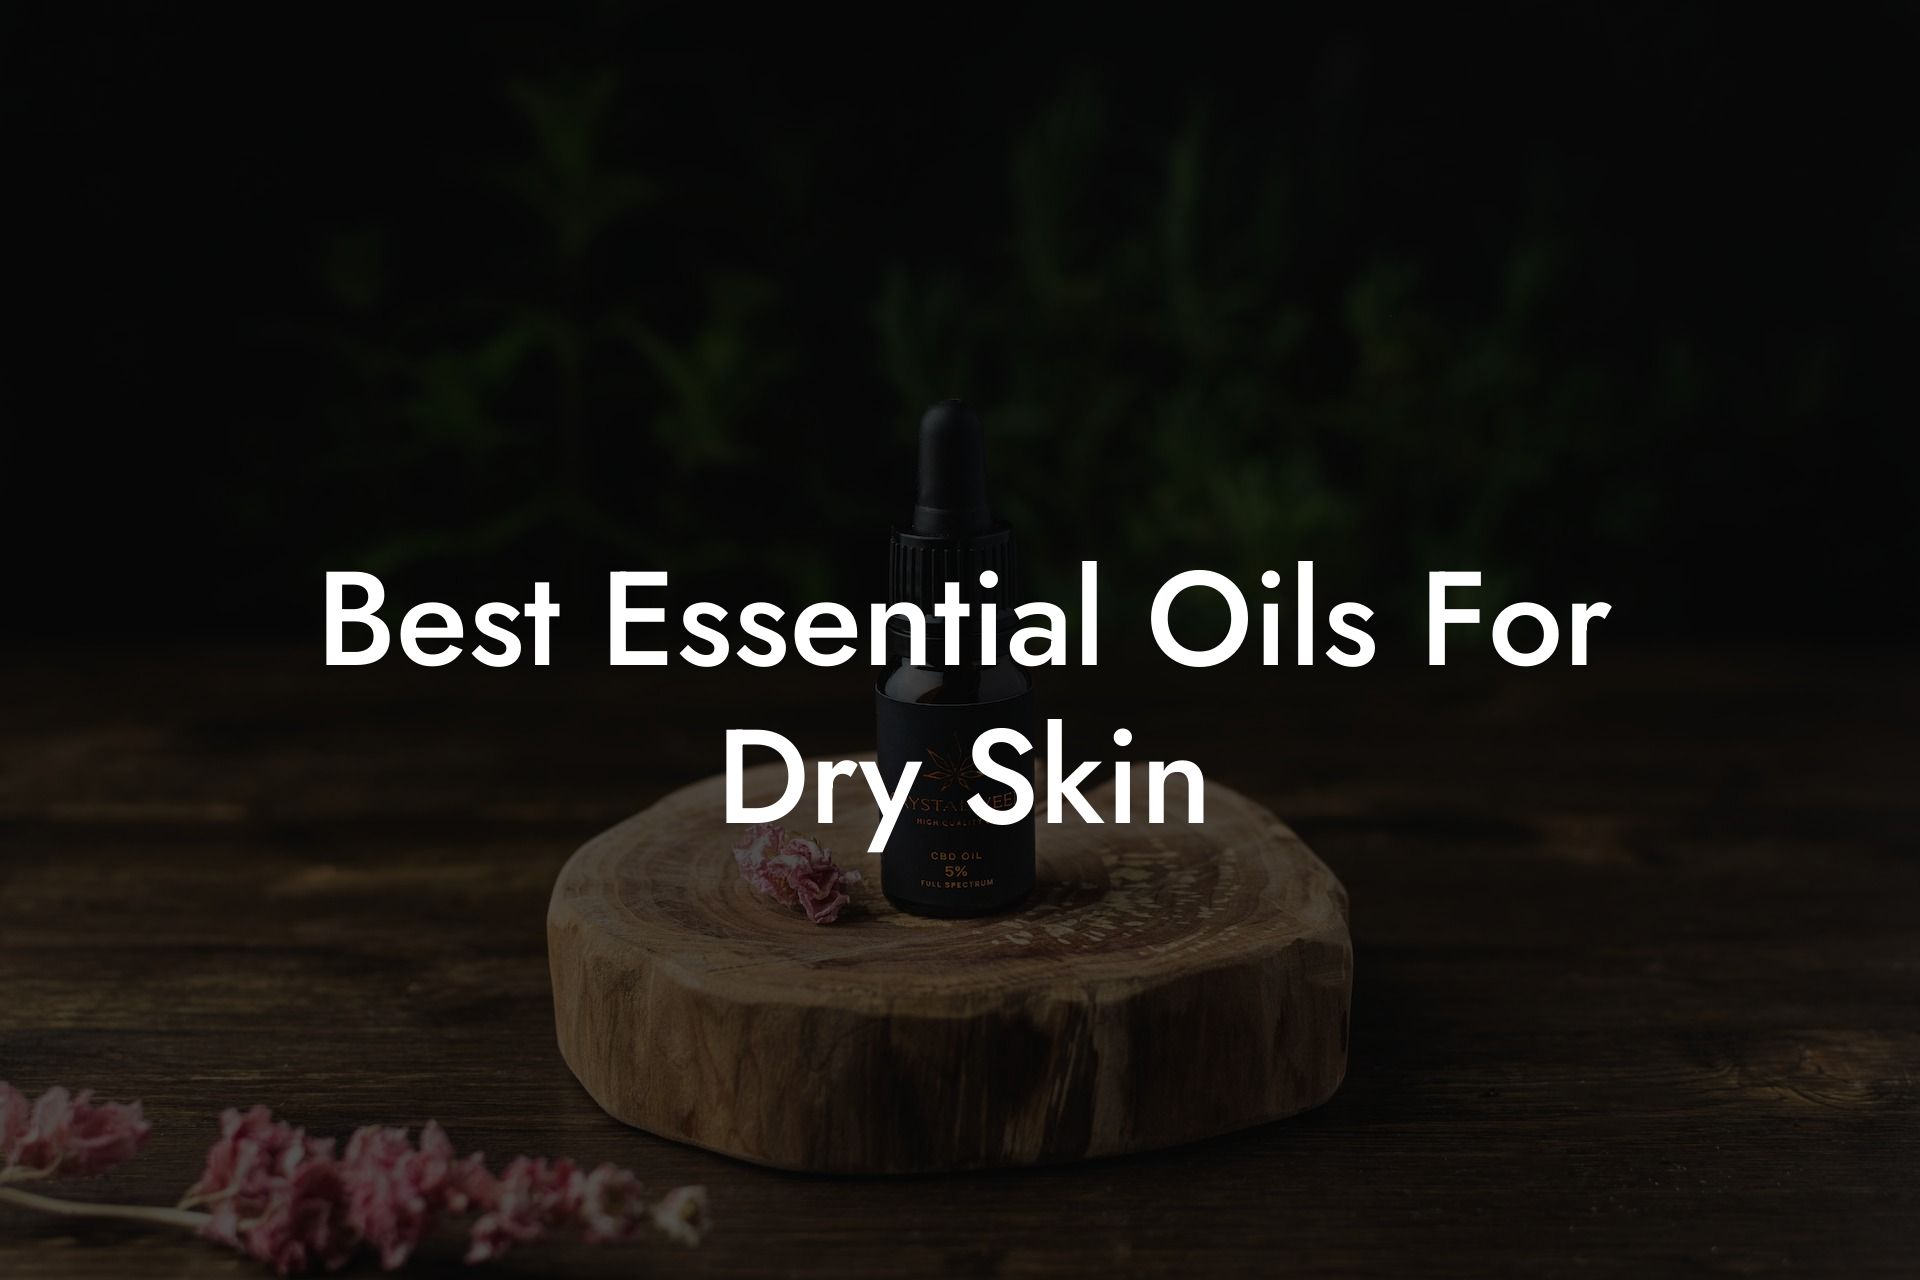 Best Essential Oils For Dry Skin